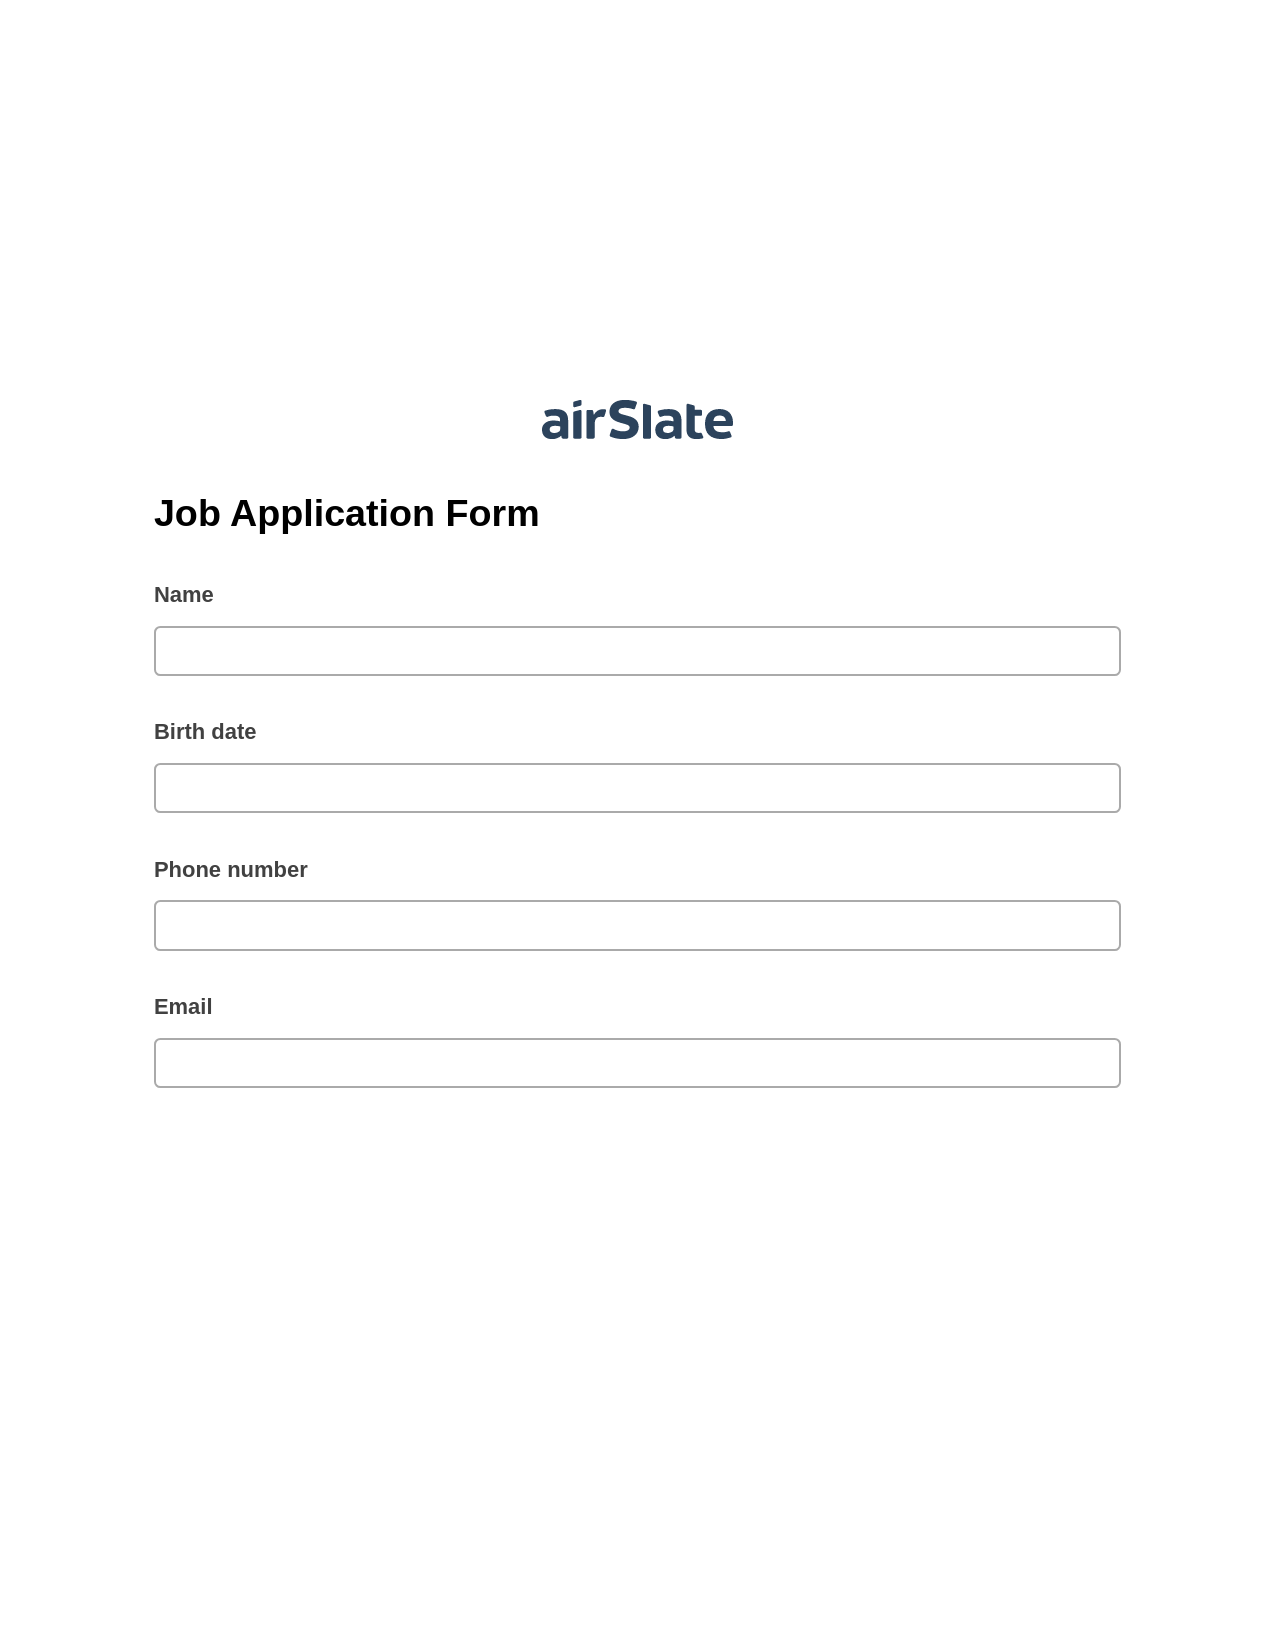 Job Application Form Pre-fill Dropdown from Airtable, Update Salesforce Record Bot, Export to Smartsheet